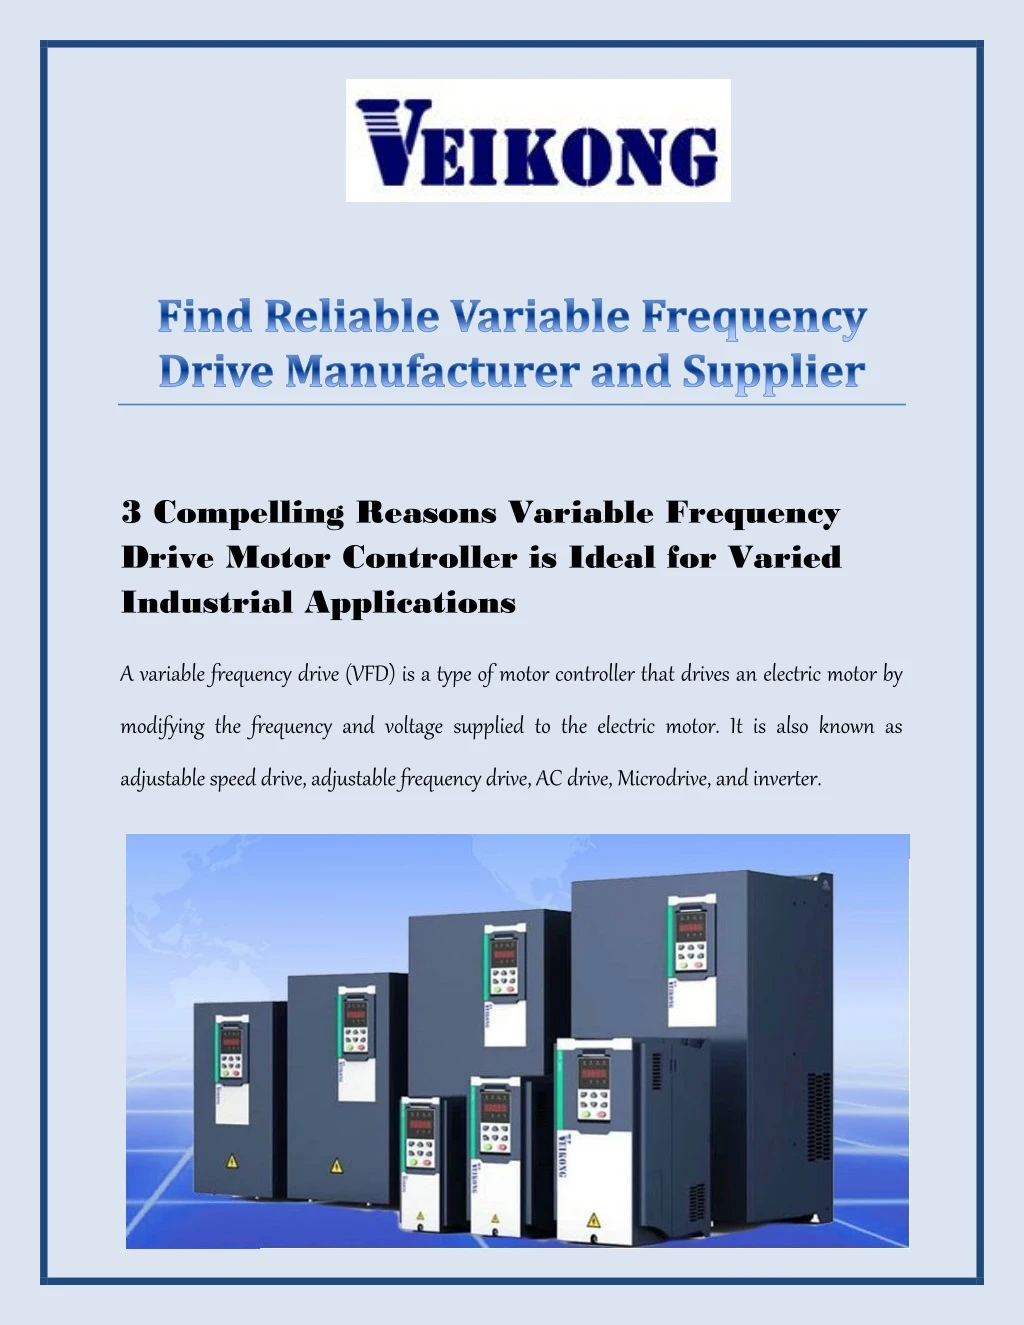 3 compelling reasons variable frequency drive